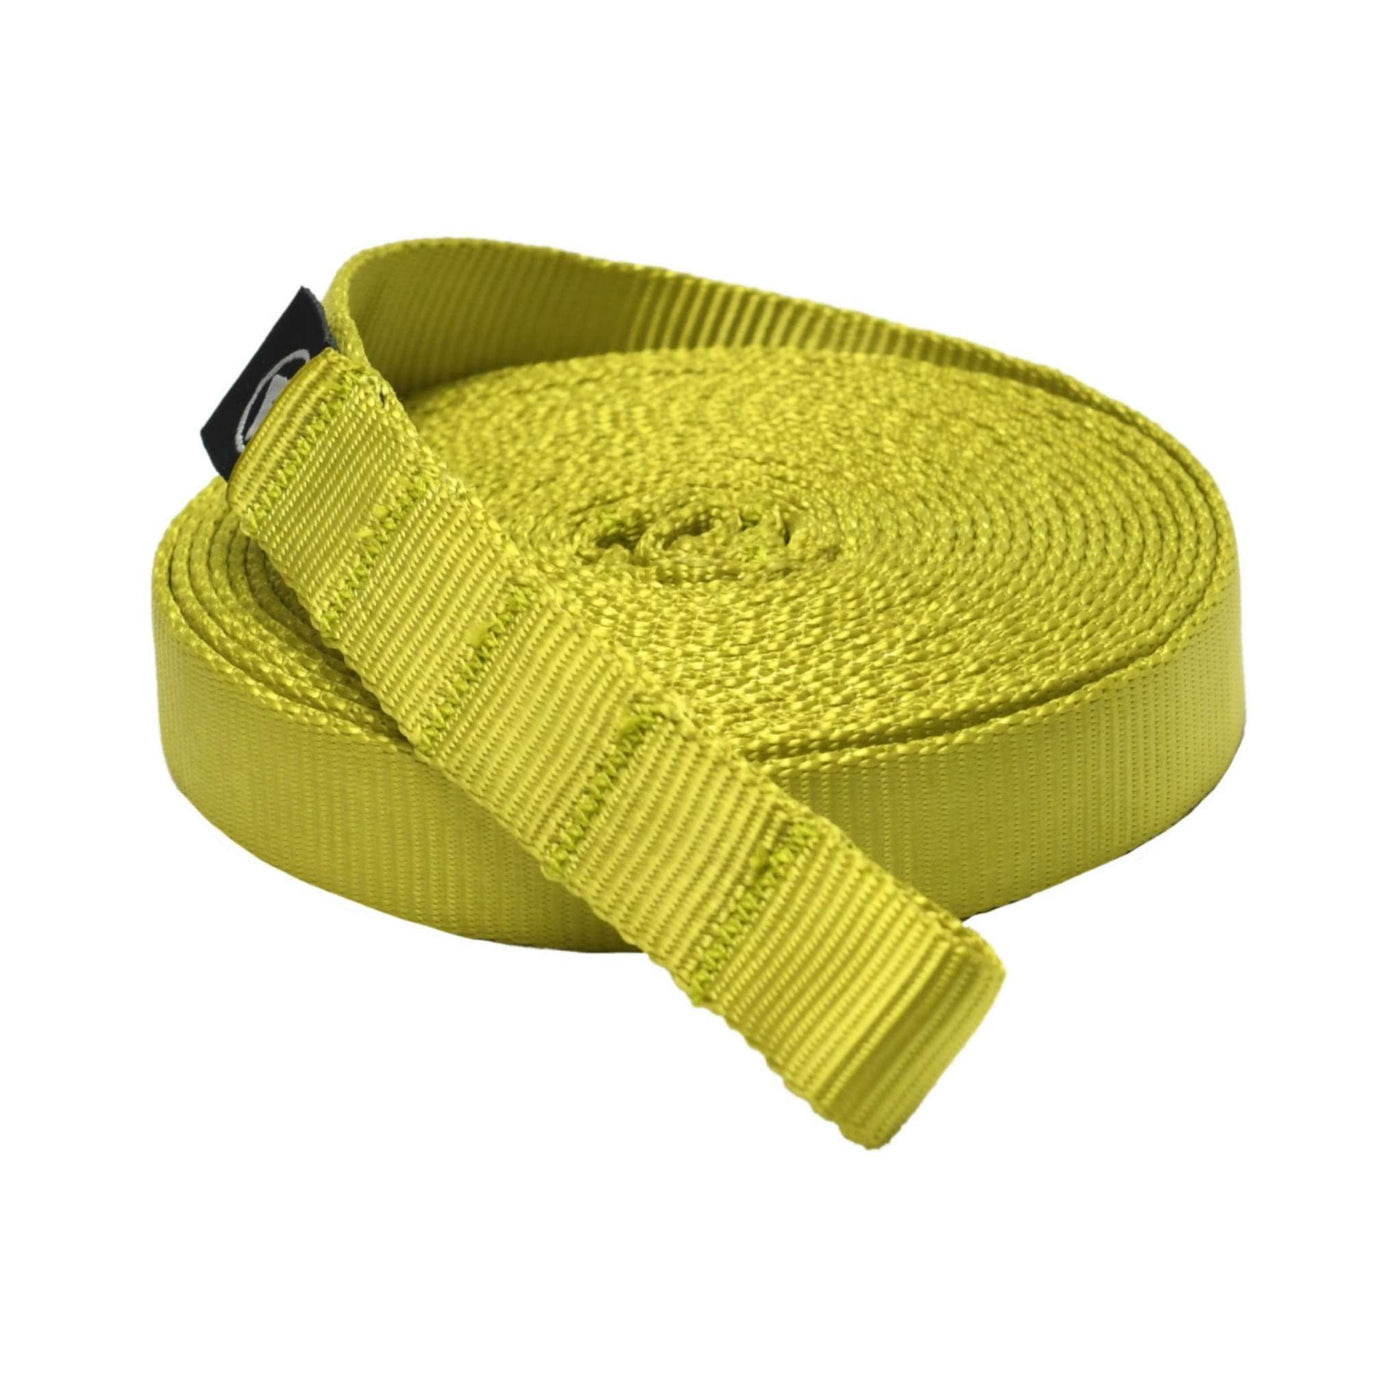 Peak PS Rescue Tape - 5m | Kayaking Safety Equipment NZ | Further Faster Christchurch NZ